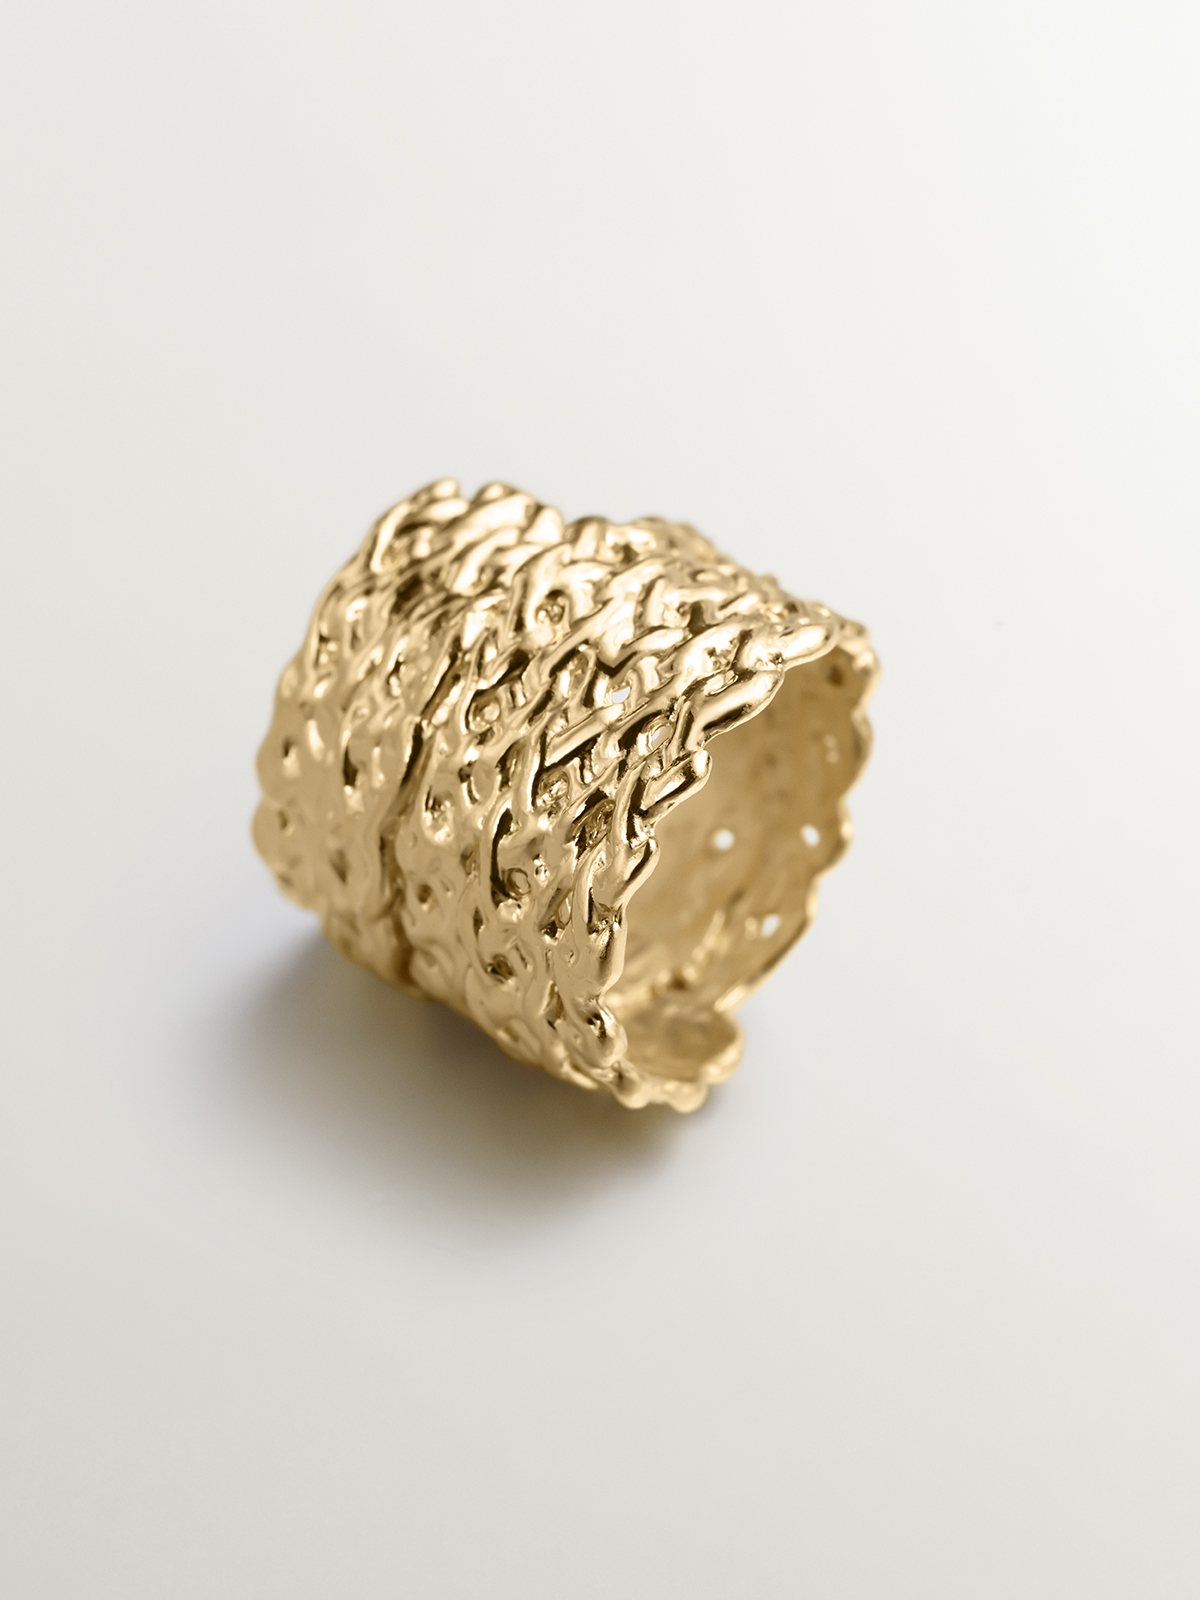 Wide 925 silver ring bathed in 18k yellow gold with wicker texture.